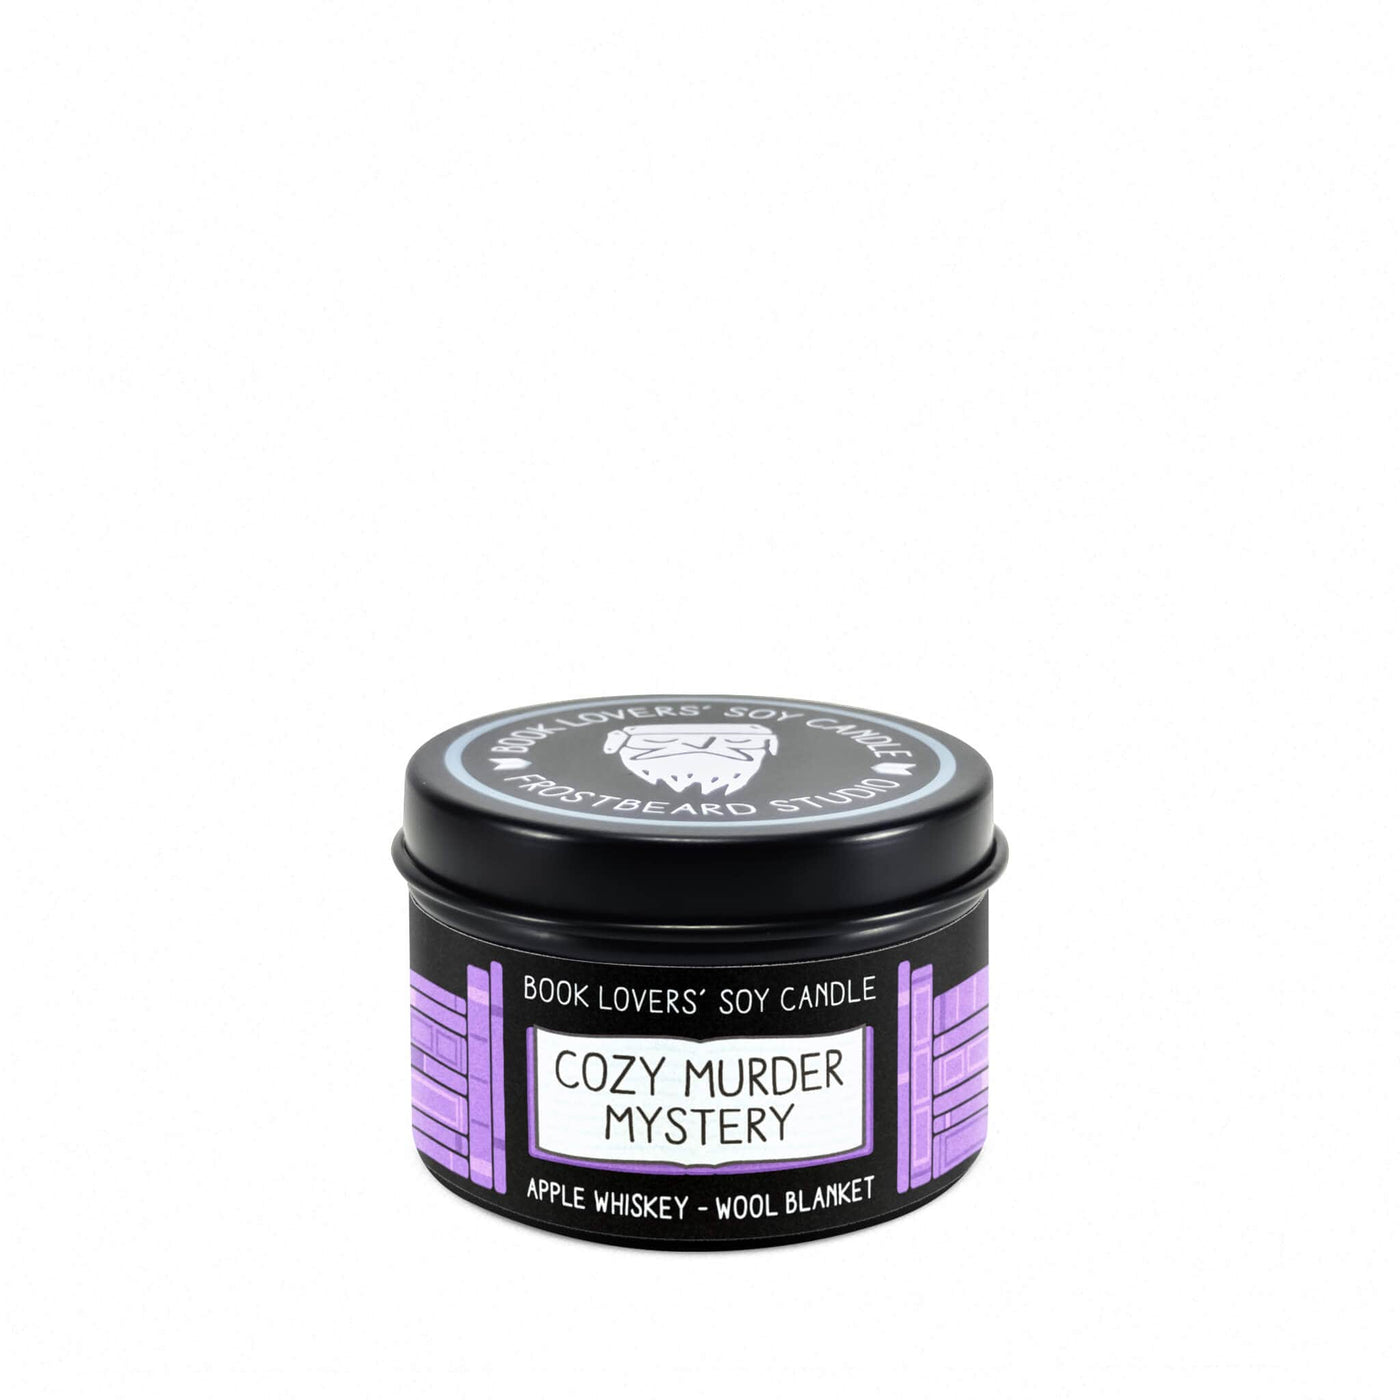 Cozy Murder Mystery  -  2 oz Tin  -  Book Lovers' Soy Candle  -  Frostbeard Studio